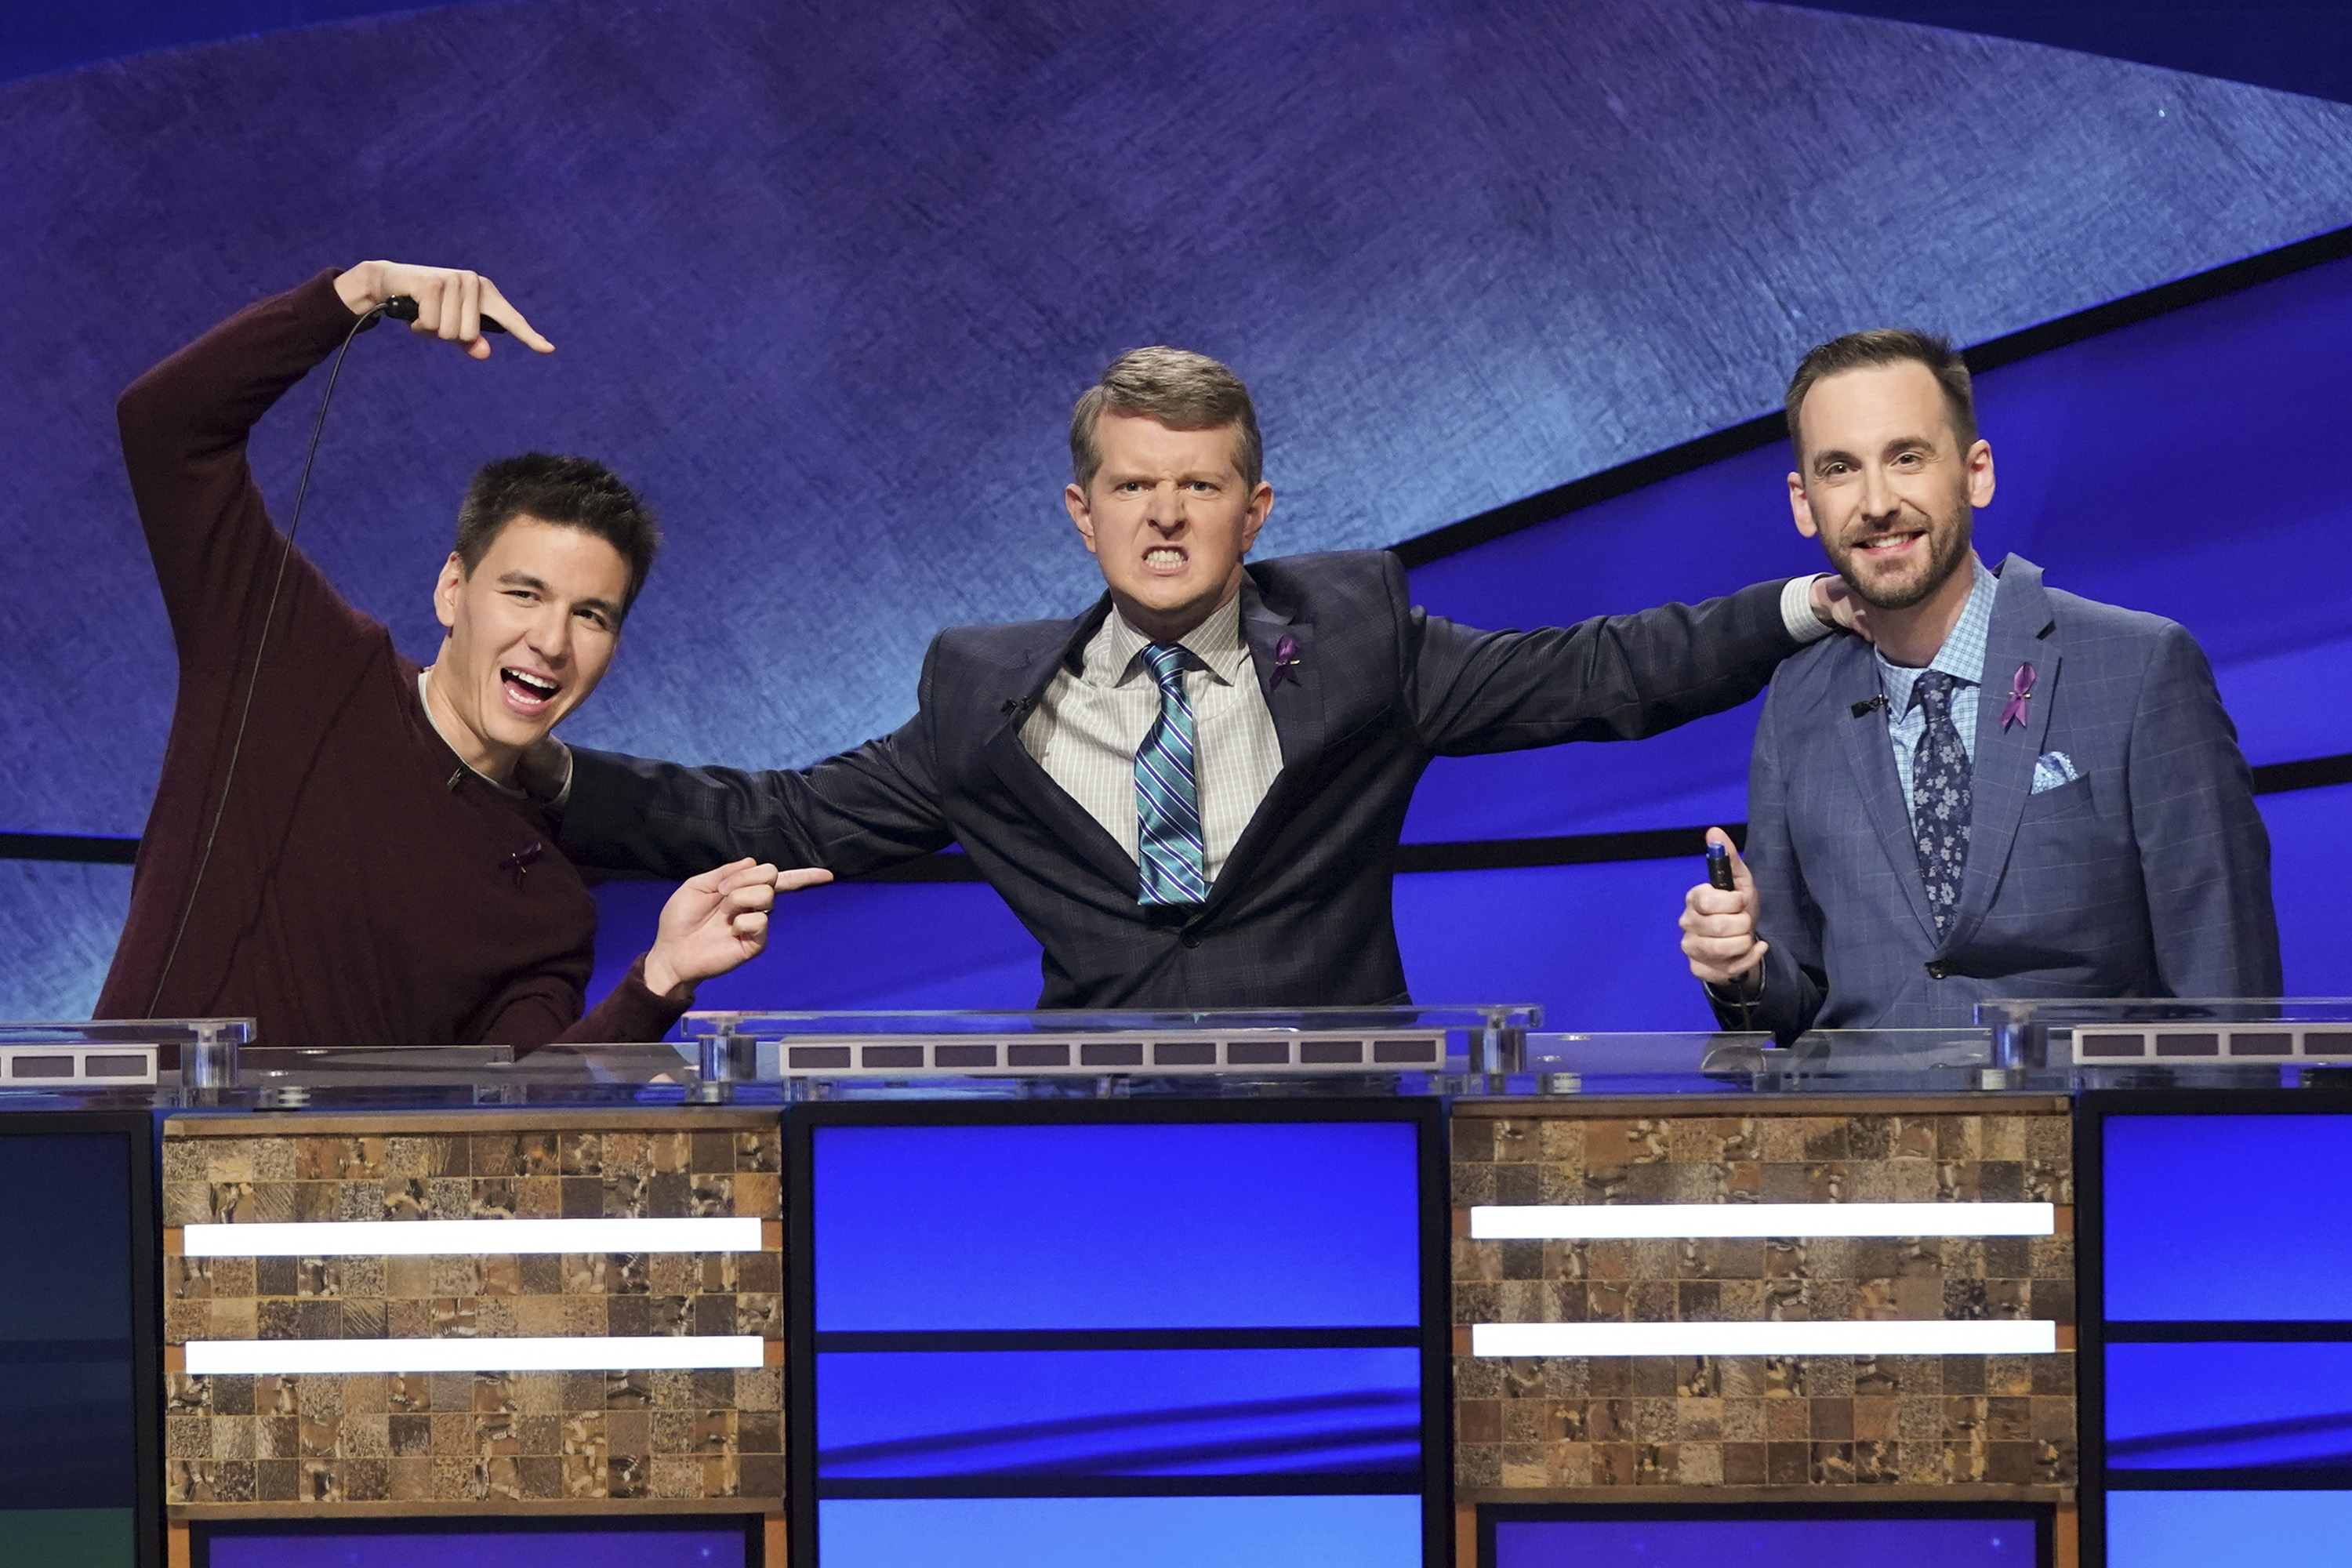 James Holzhauer, Ken Jennings, and Brad Rutter in 'Jeopardy!'s 2020 Greatest of All Time tournament